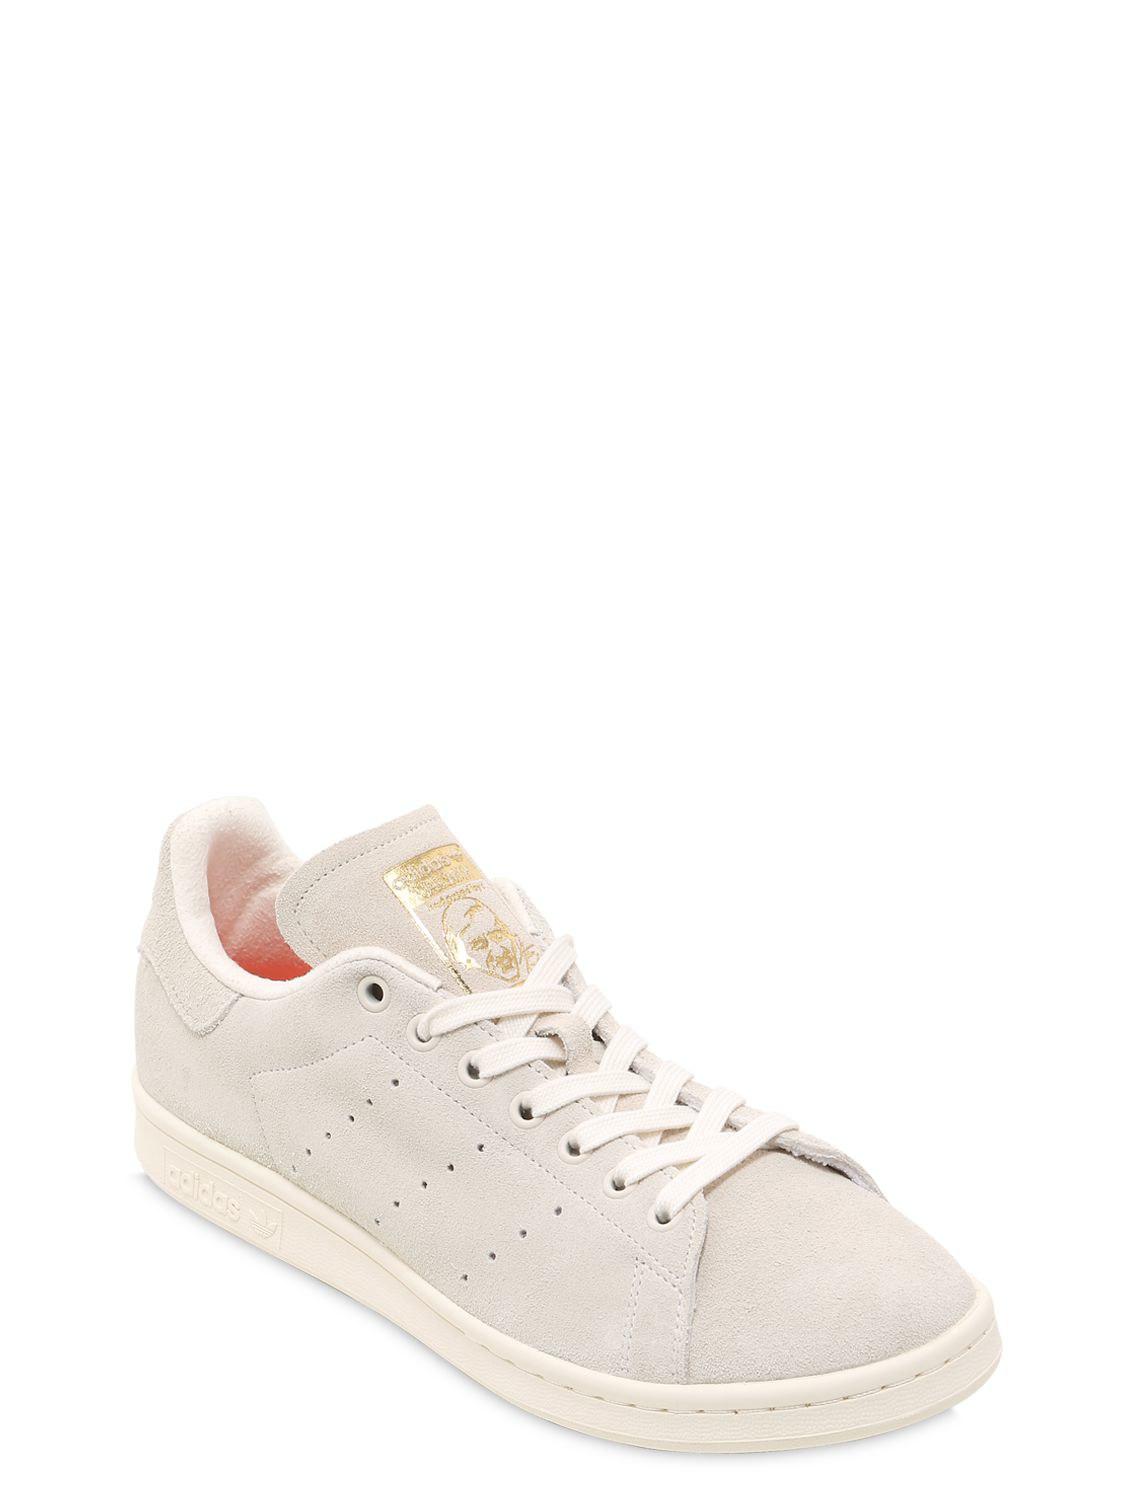 adidas Originals Stan Smith Suede Sneakers in Natural for Men | Lyst